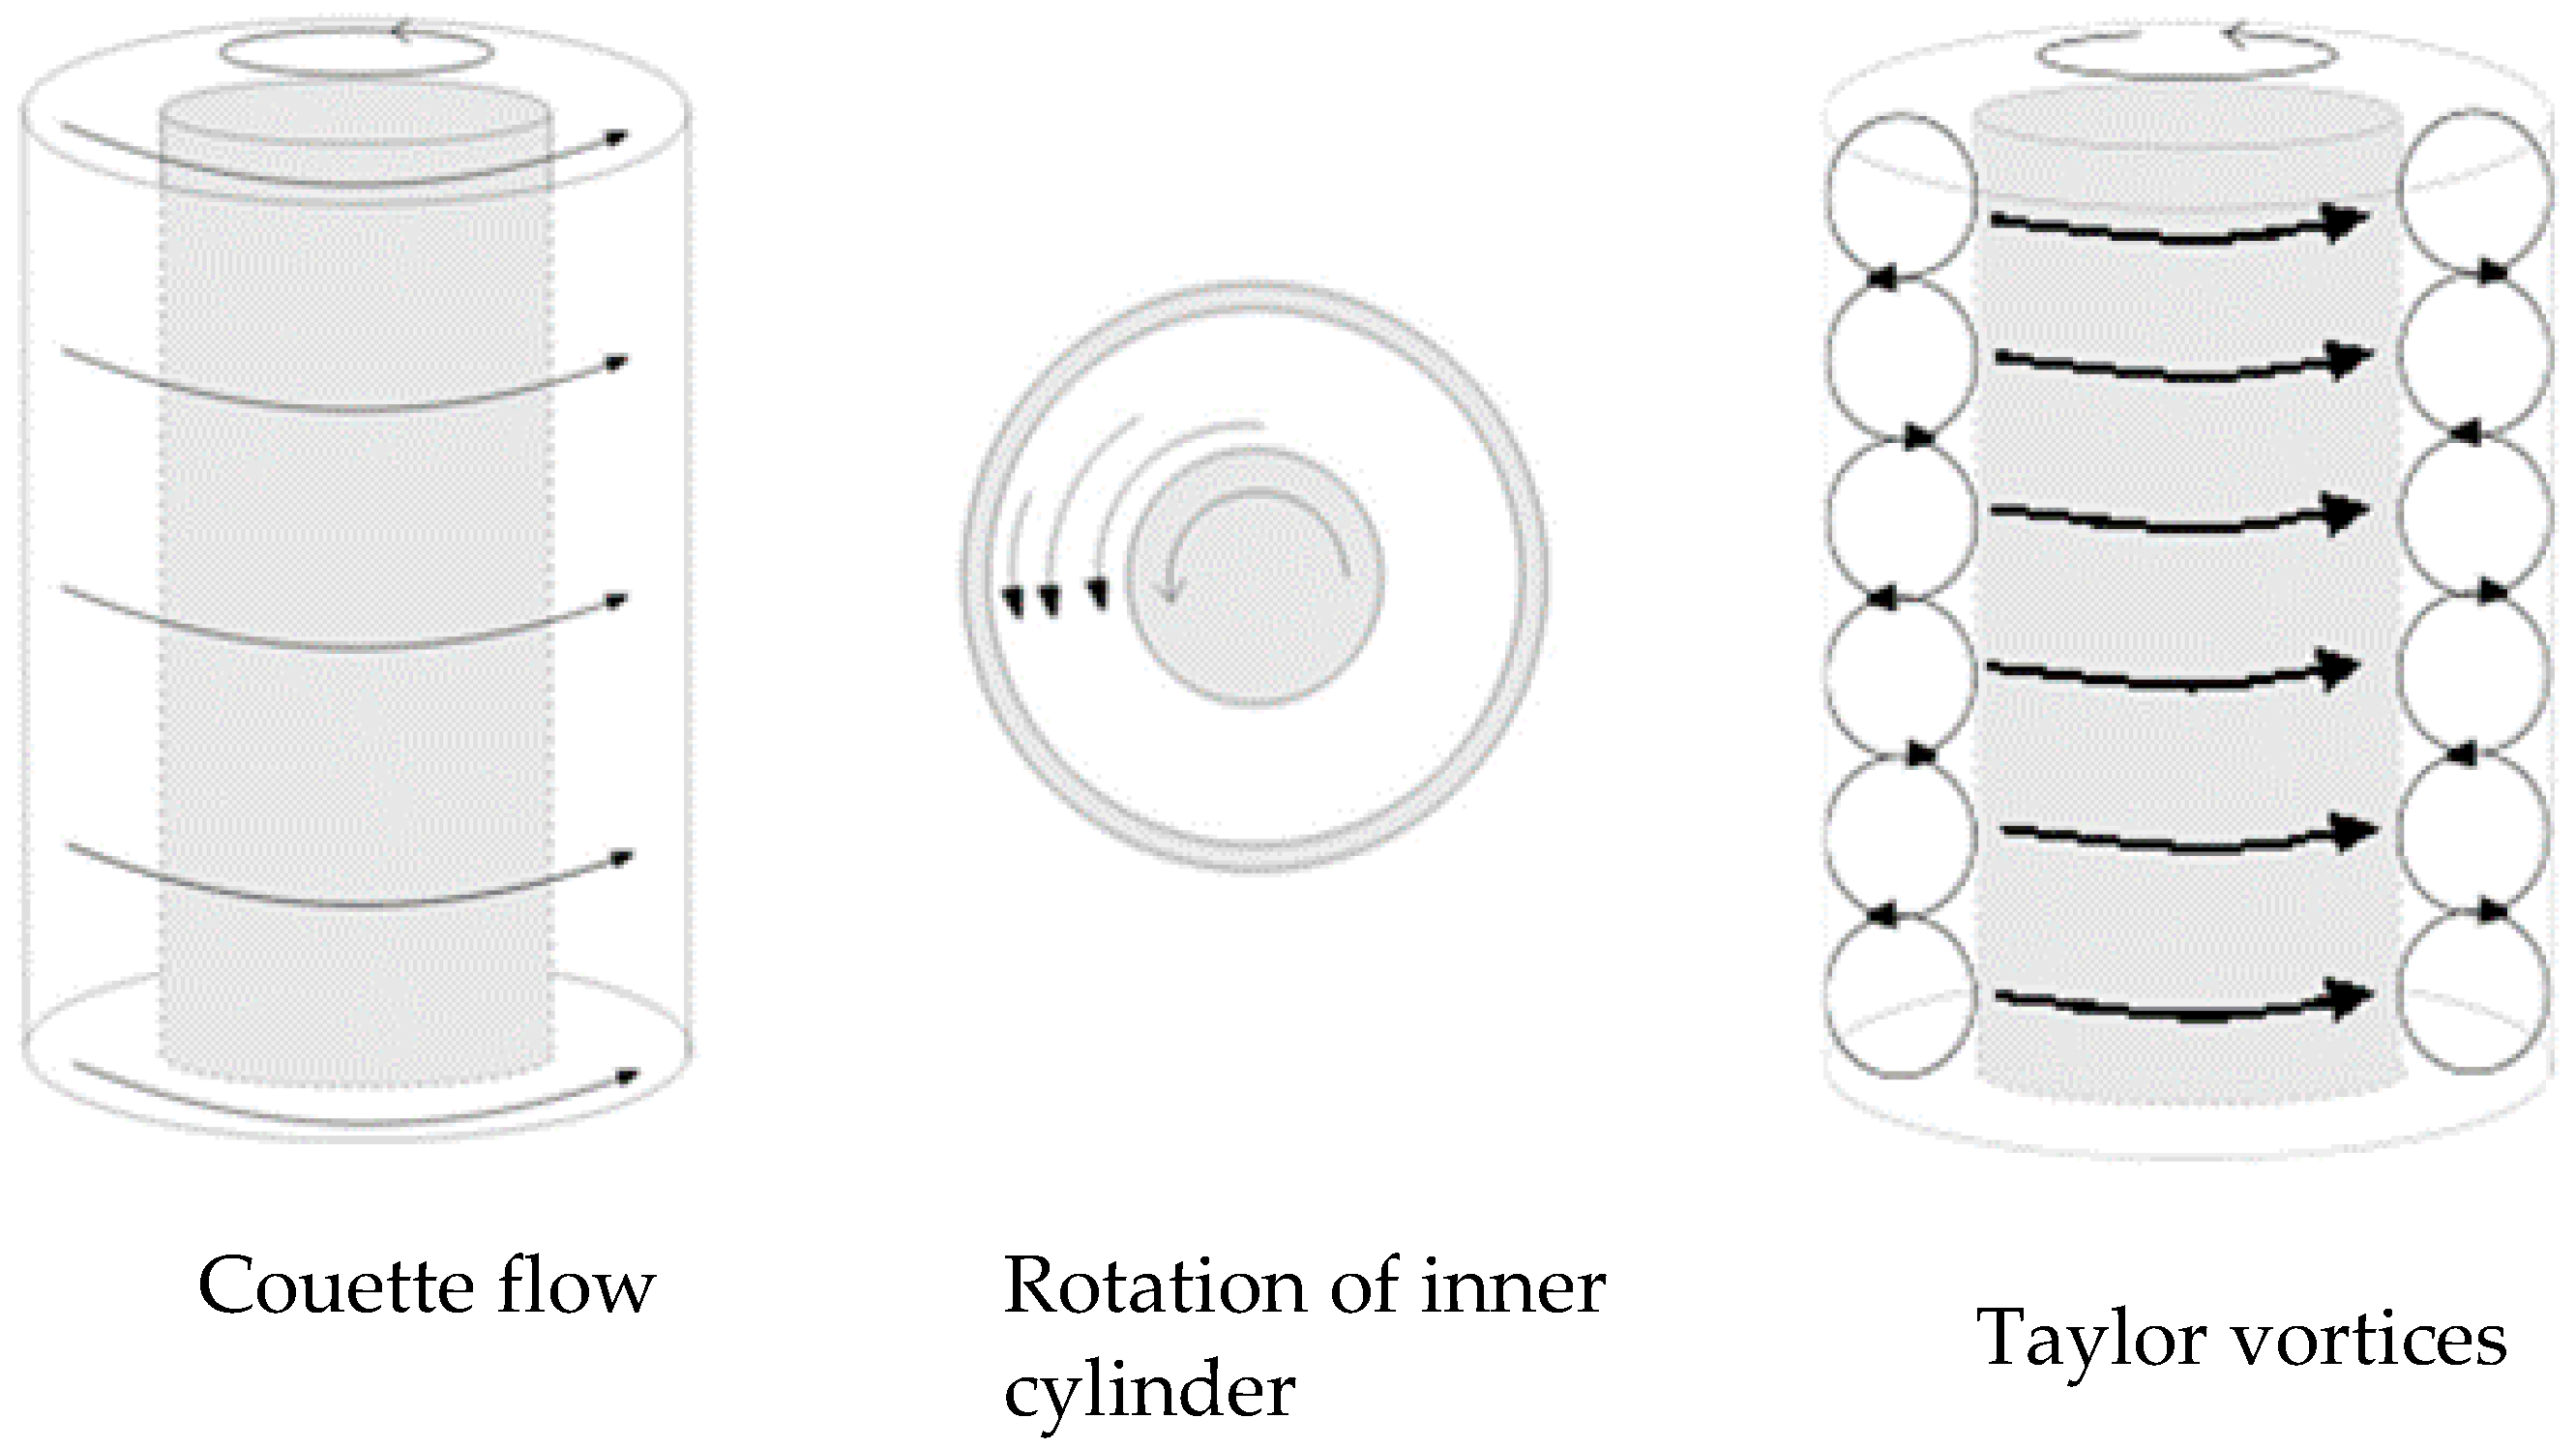 Processes | Free Full-Text | Research of Flow Stability of Non-Newtonian  Magnetorheological Fluid Flow in the Gap between Two Cylinders | HTML